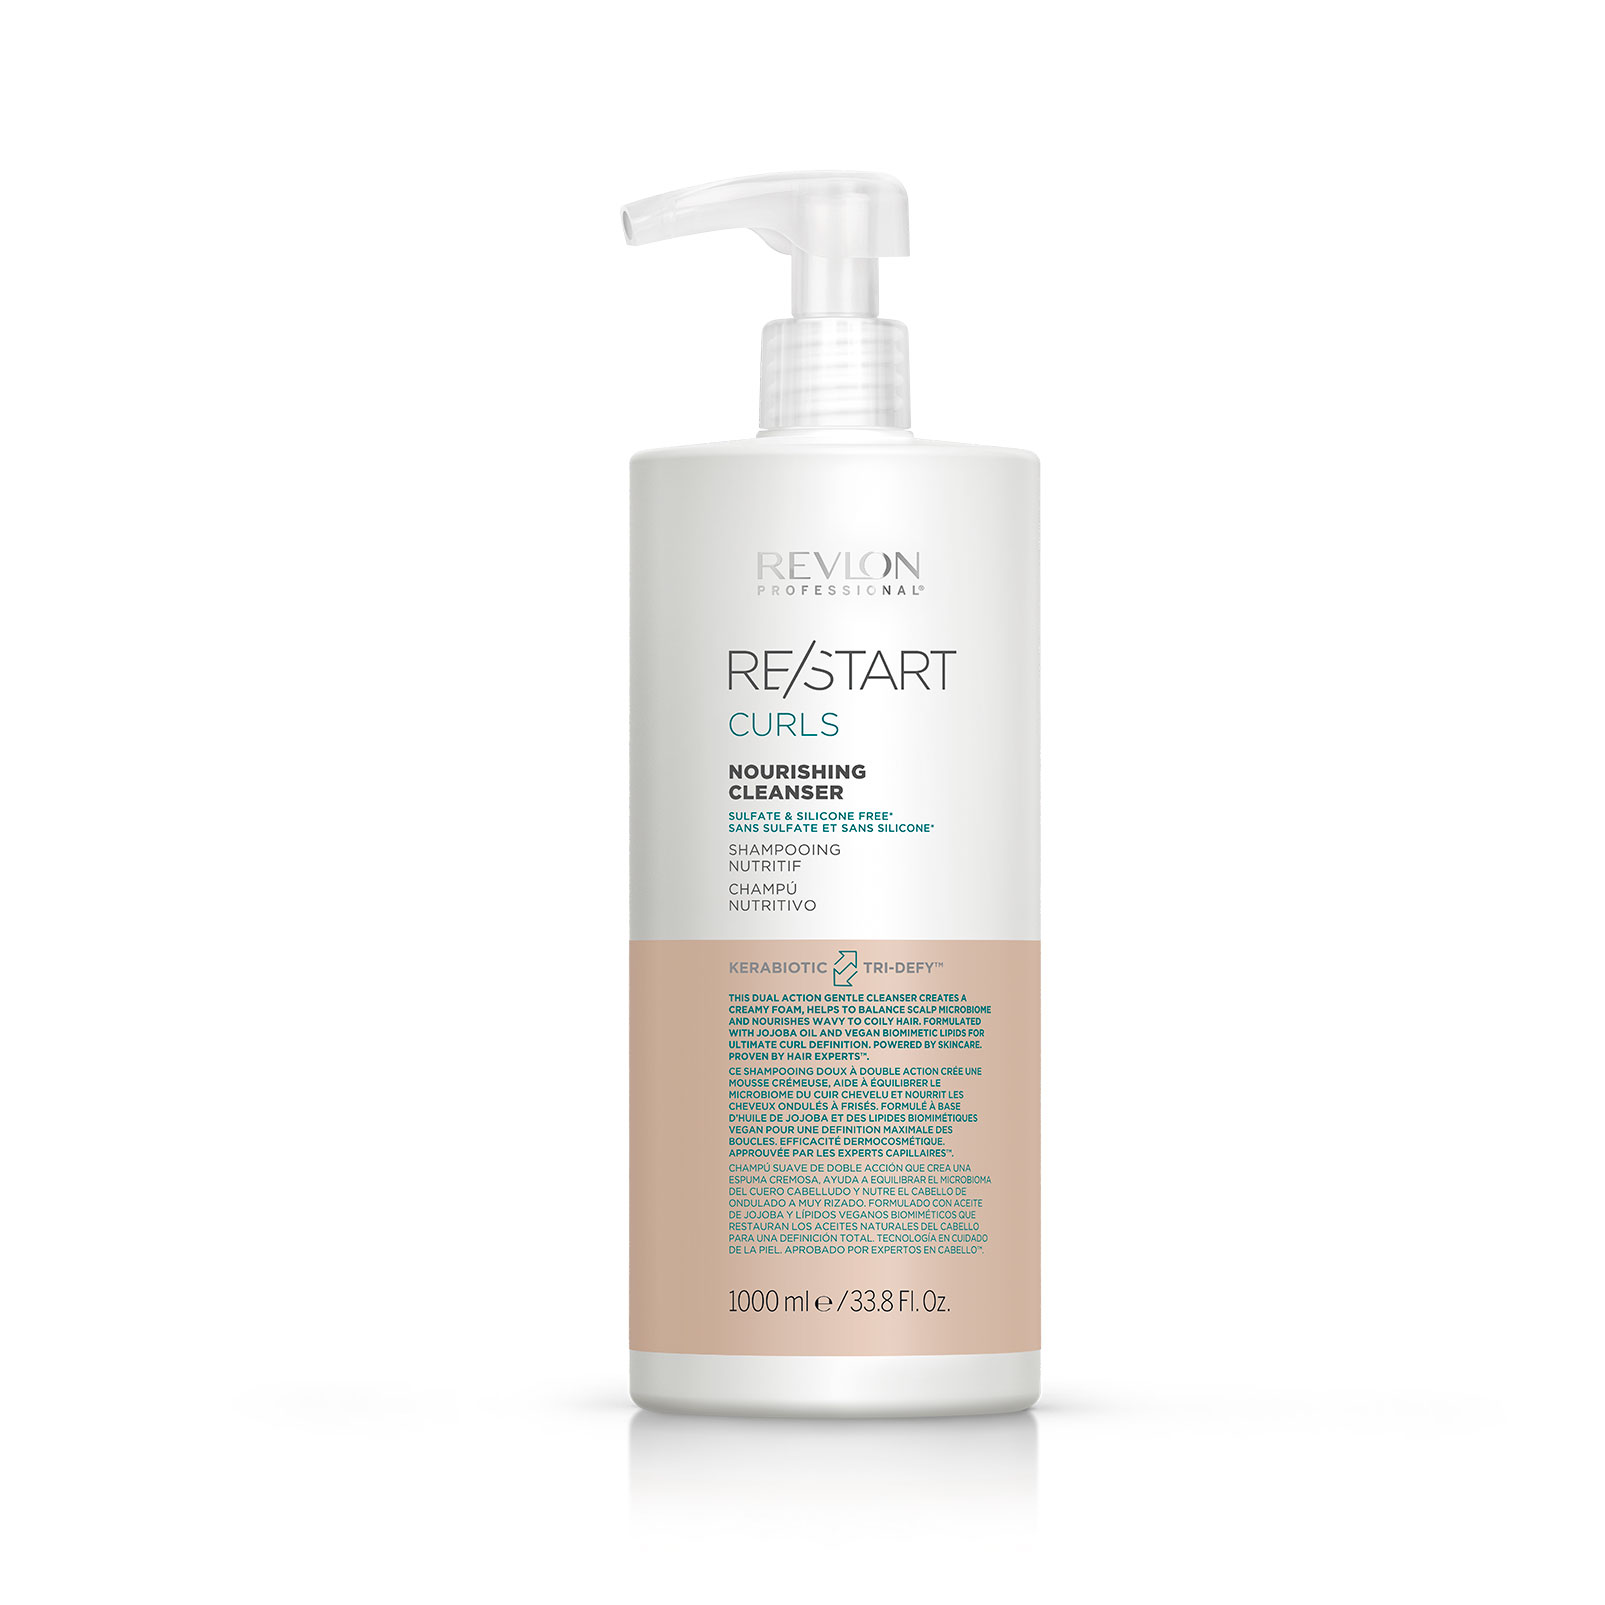 RE/START™ cleanser for curly and coily hair - Revlon Professional | Spülungen